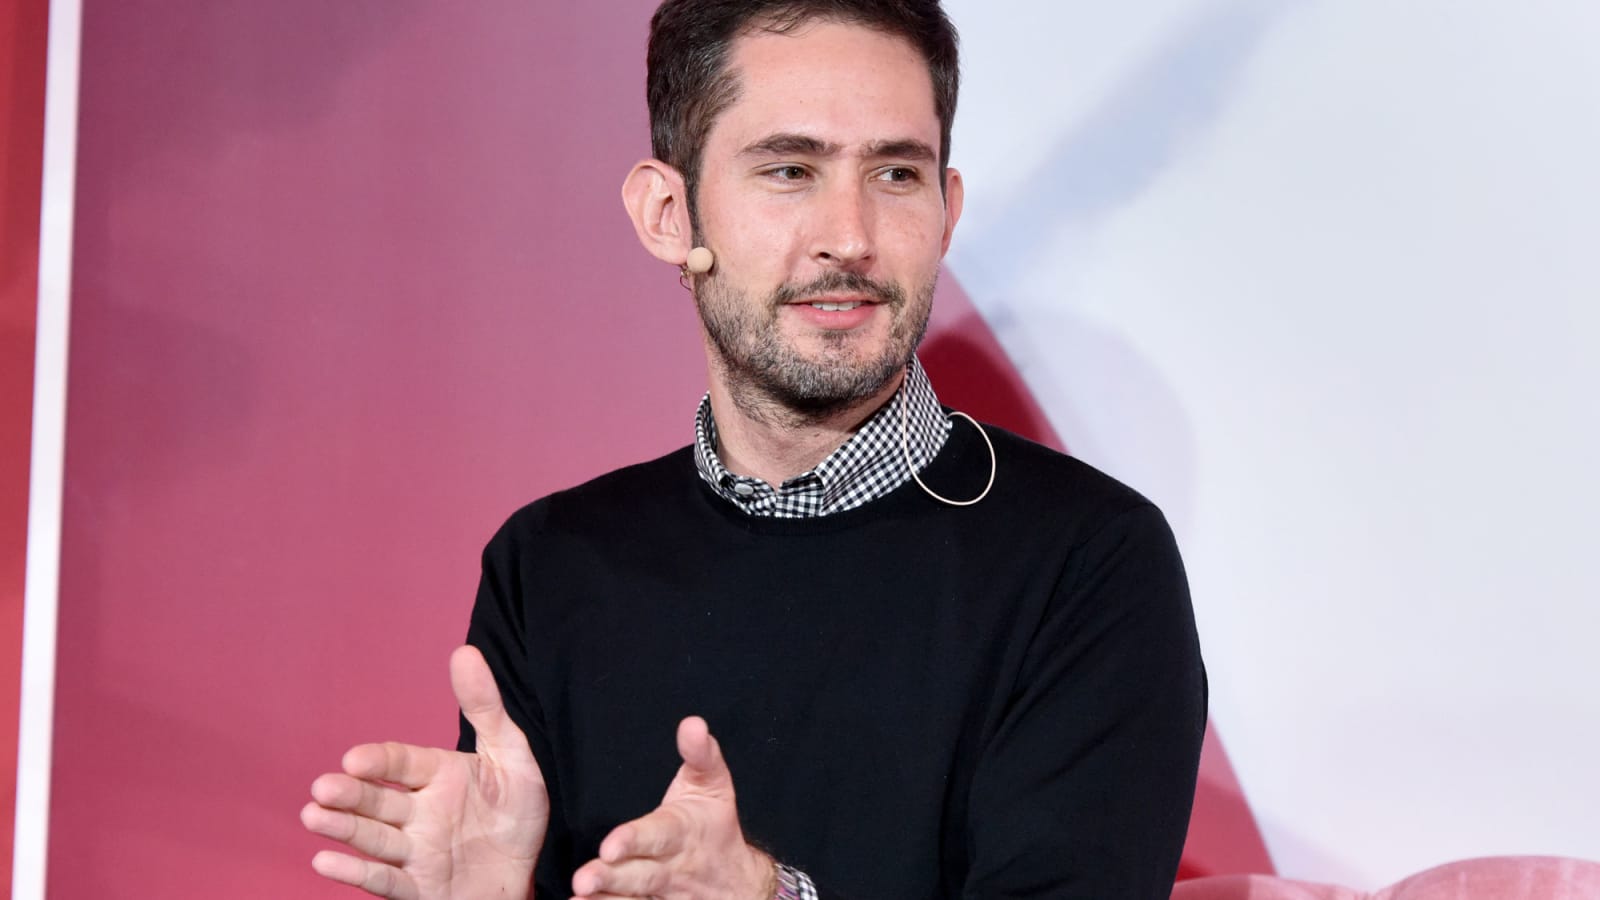 Kevin Systrom Wallpapers - Wallpaper Cave